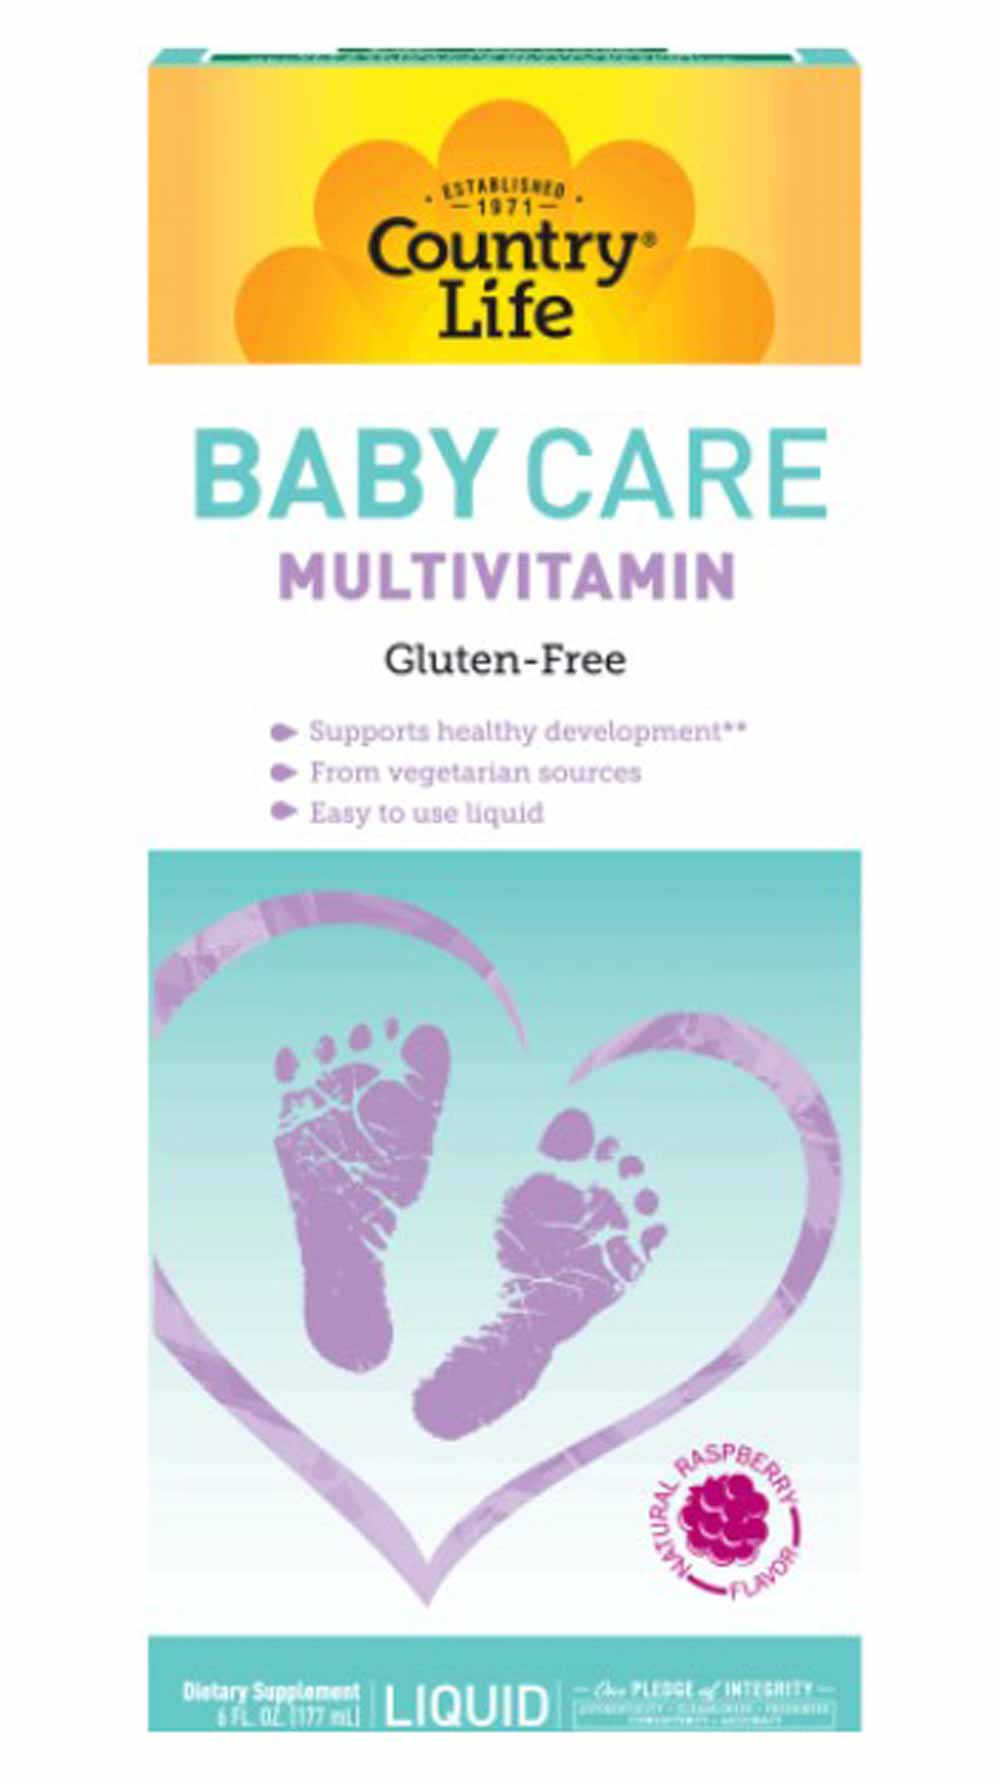 Country Life Baby Care Multivitamin